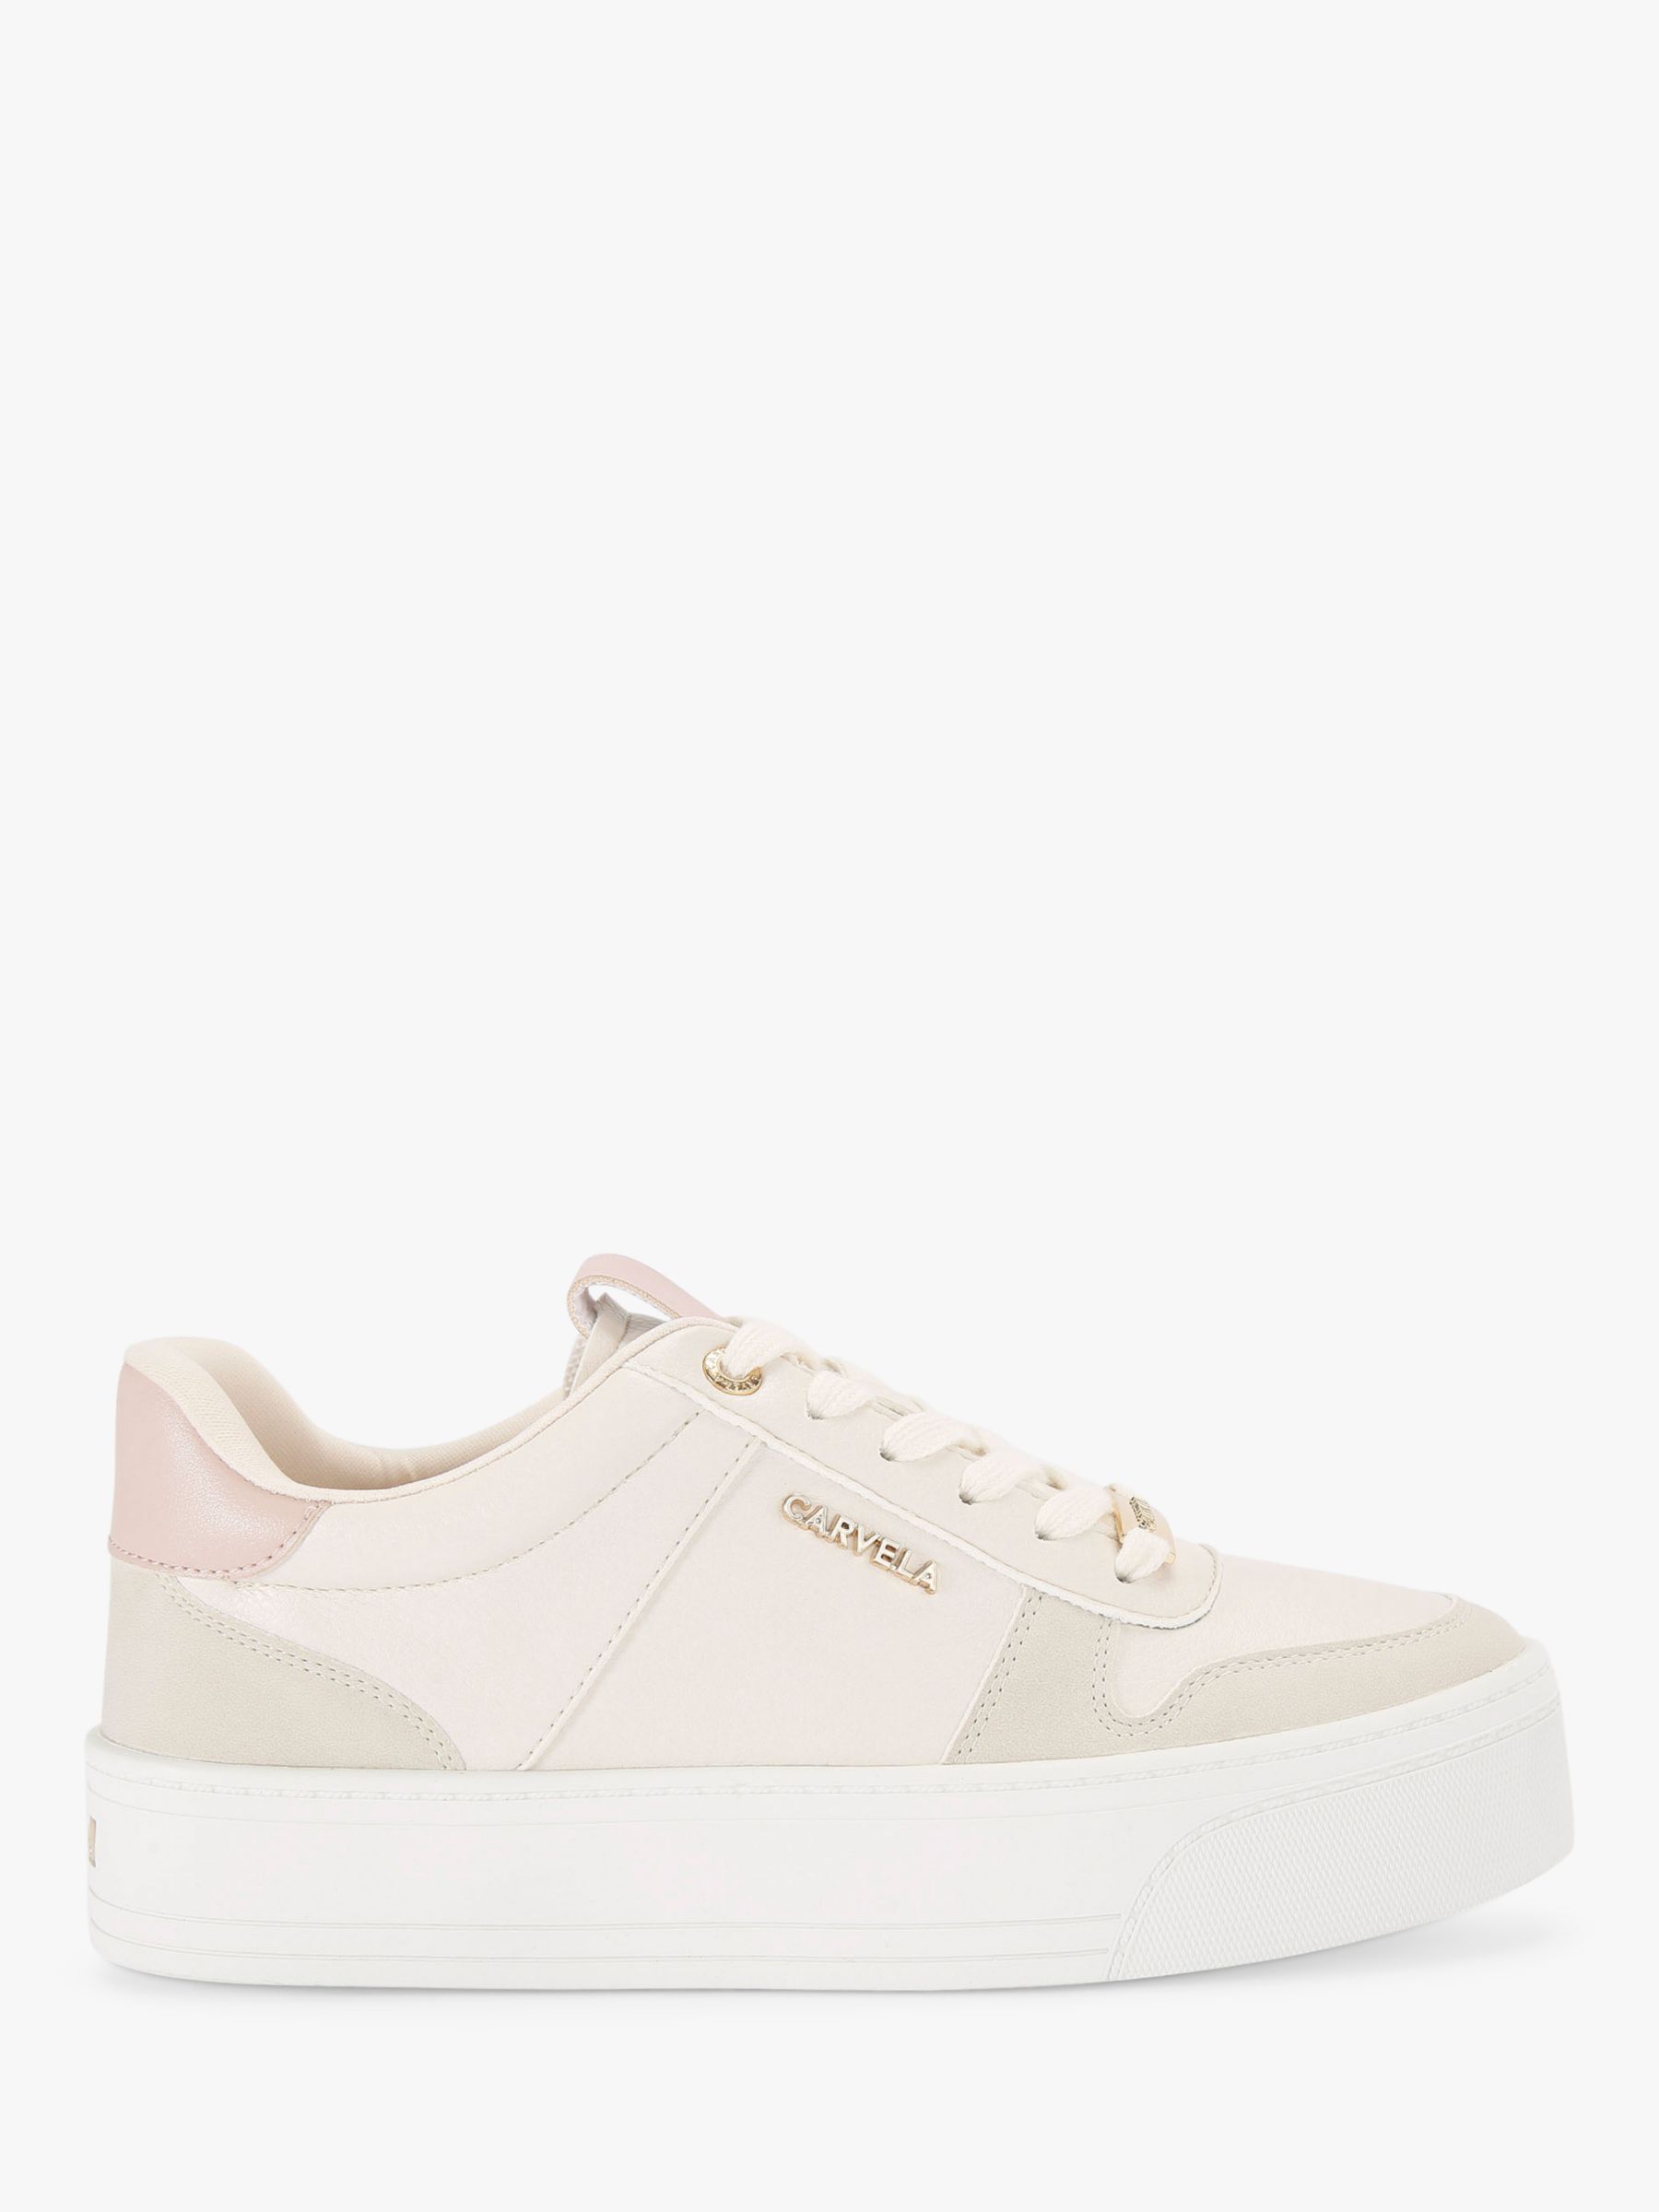 Carvela Relay Lace Up Trainers, Pink/Multi at John Lewis & Partners